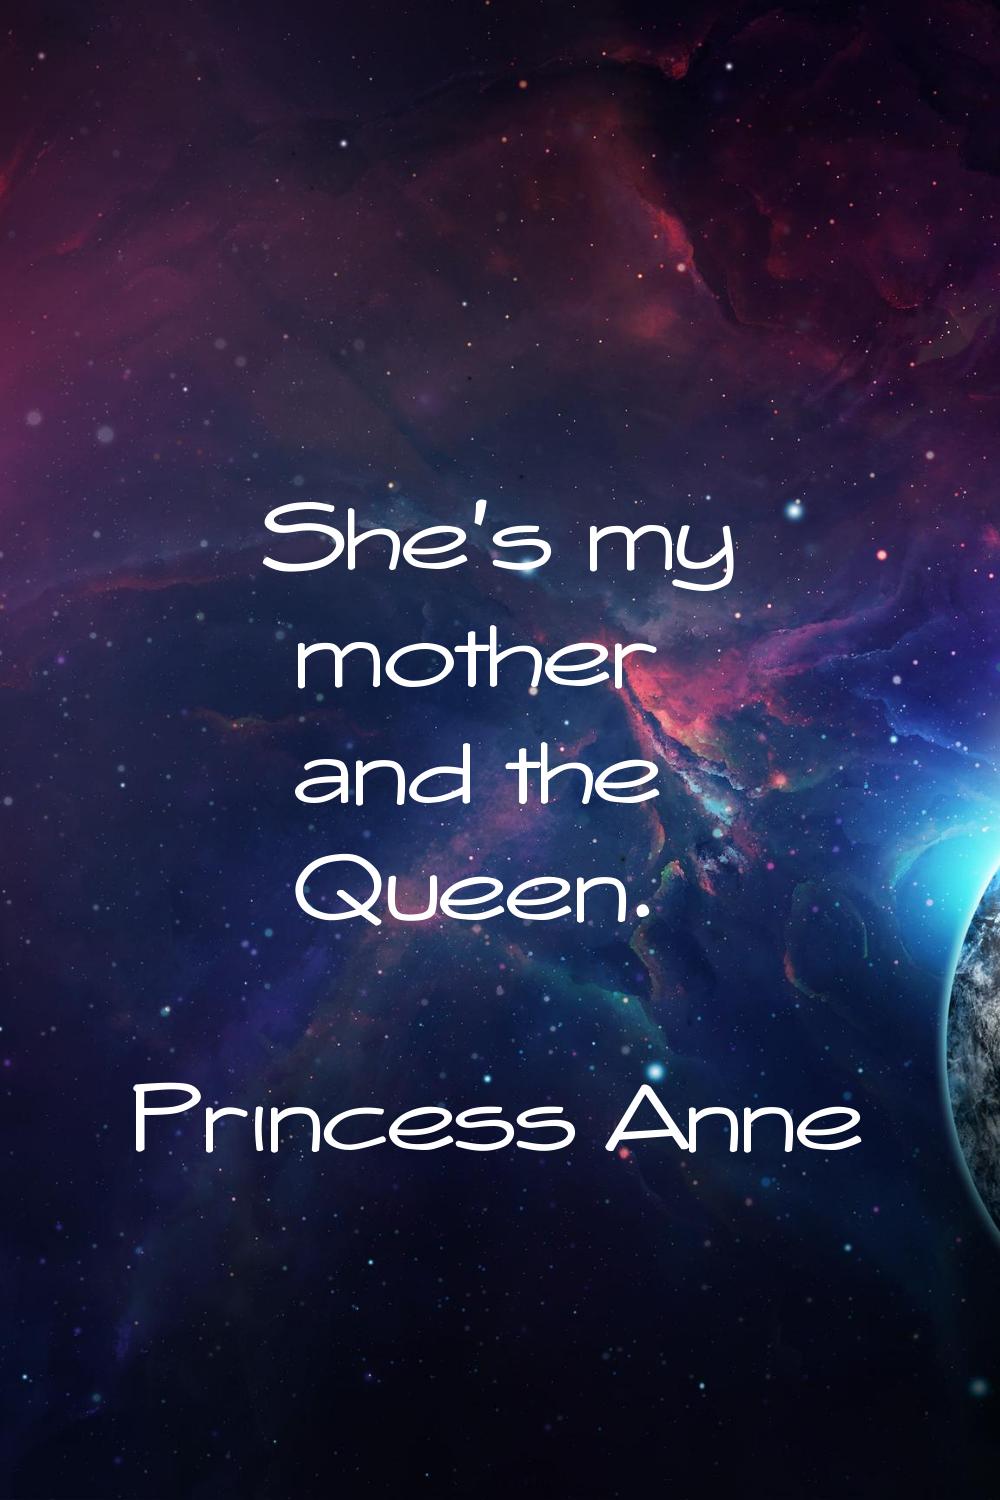 She's my mother and the Queen.